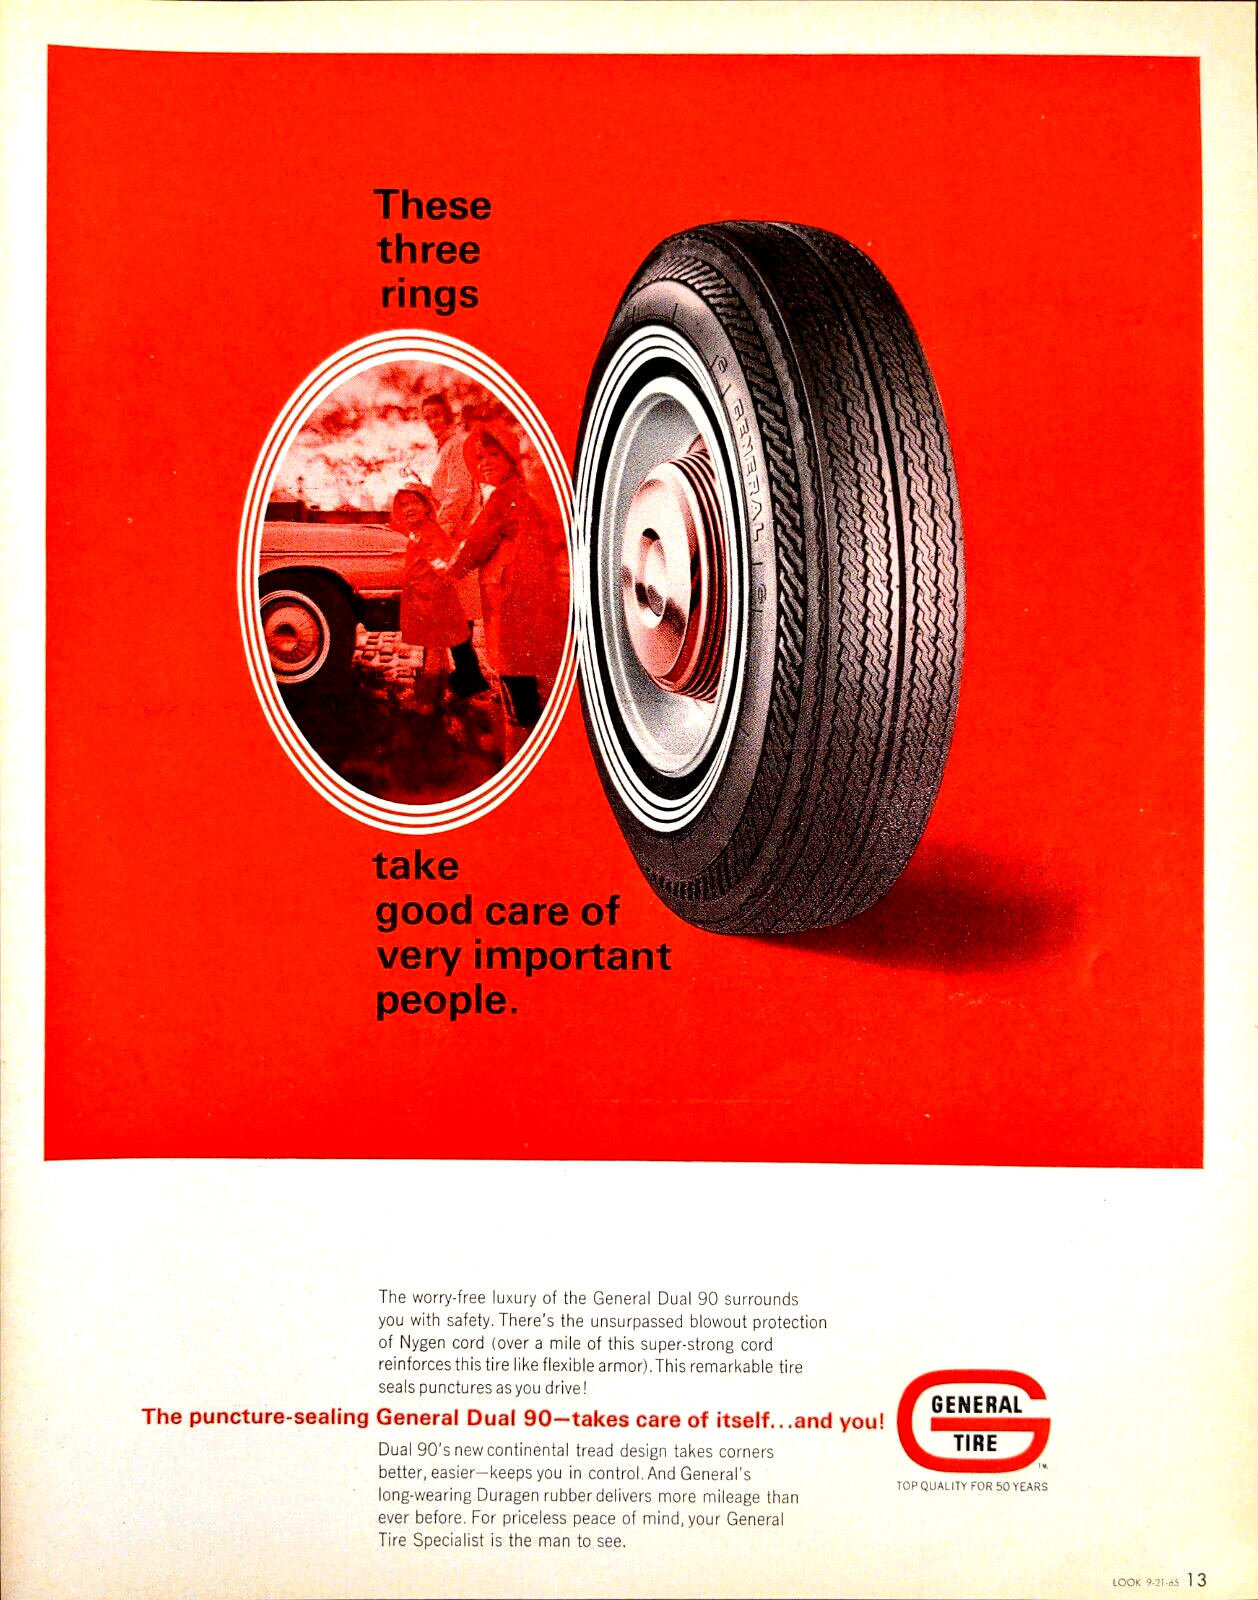 1965 General Tire General Dual 90 Blowout Protection Nygen Print Ad